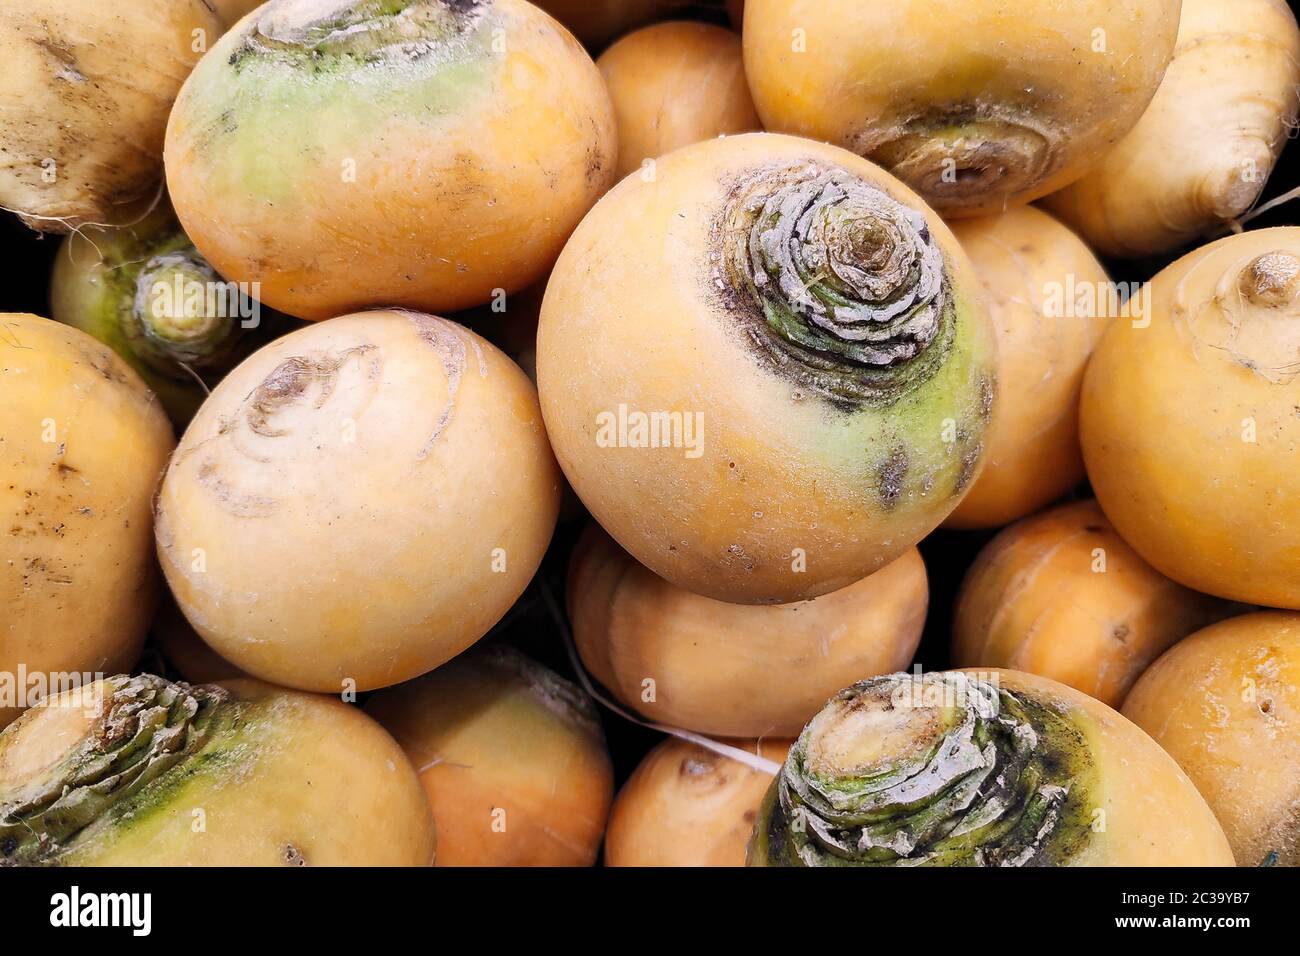 Close-up on a stack of turnip golden balls on a market stall. Stock Photo